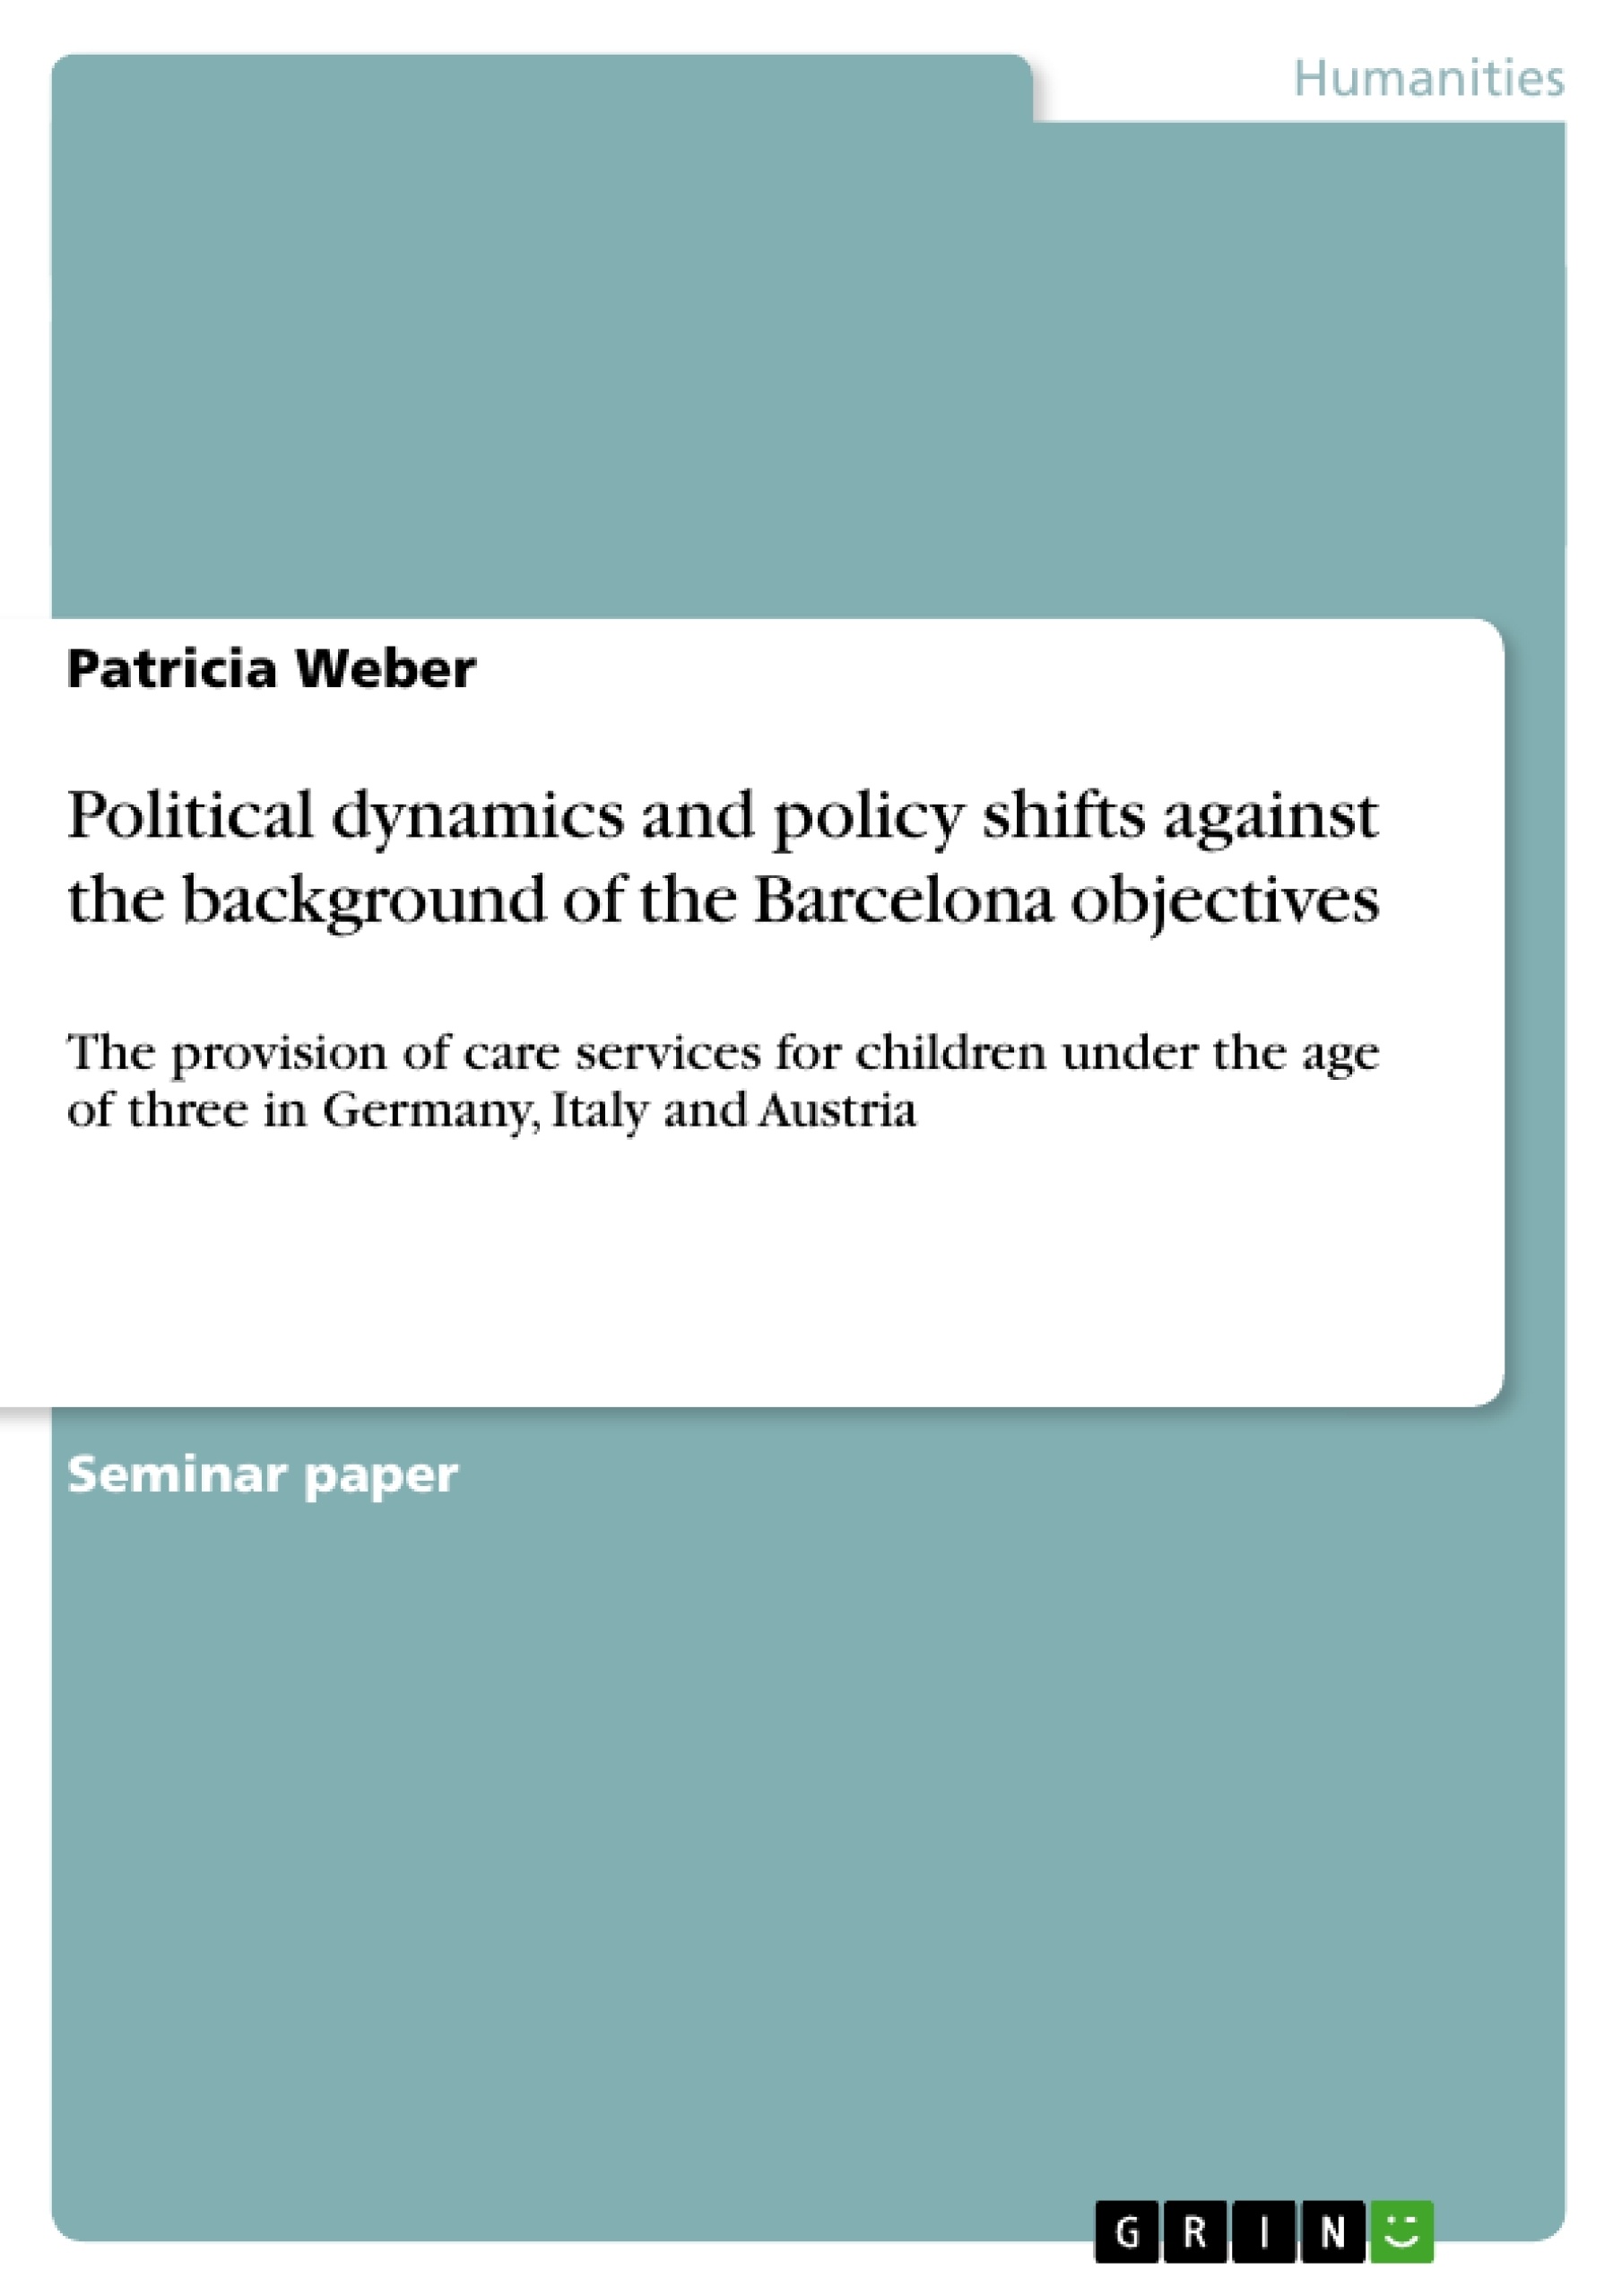 Título: Political dynamics and policy shifts against the background of the Barcelona objectives